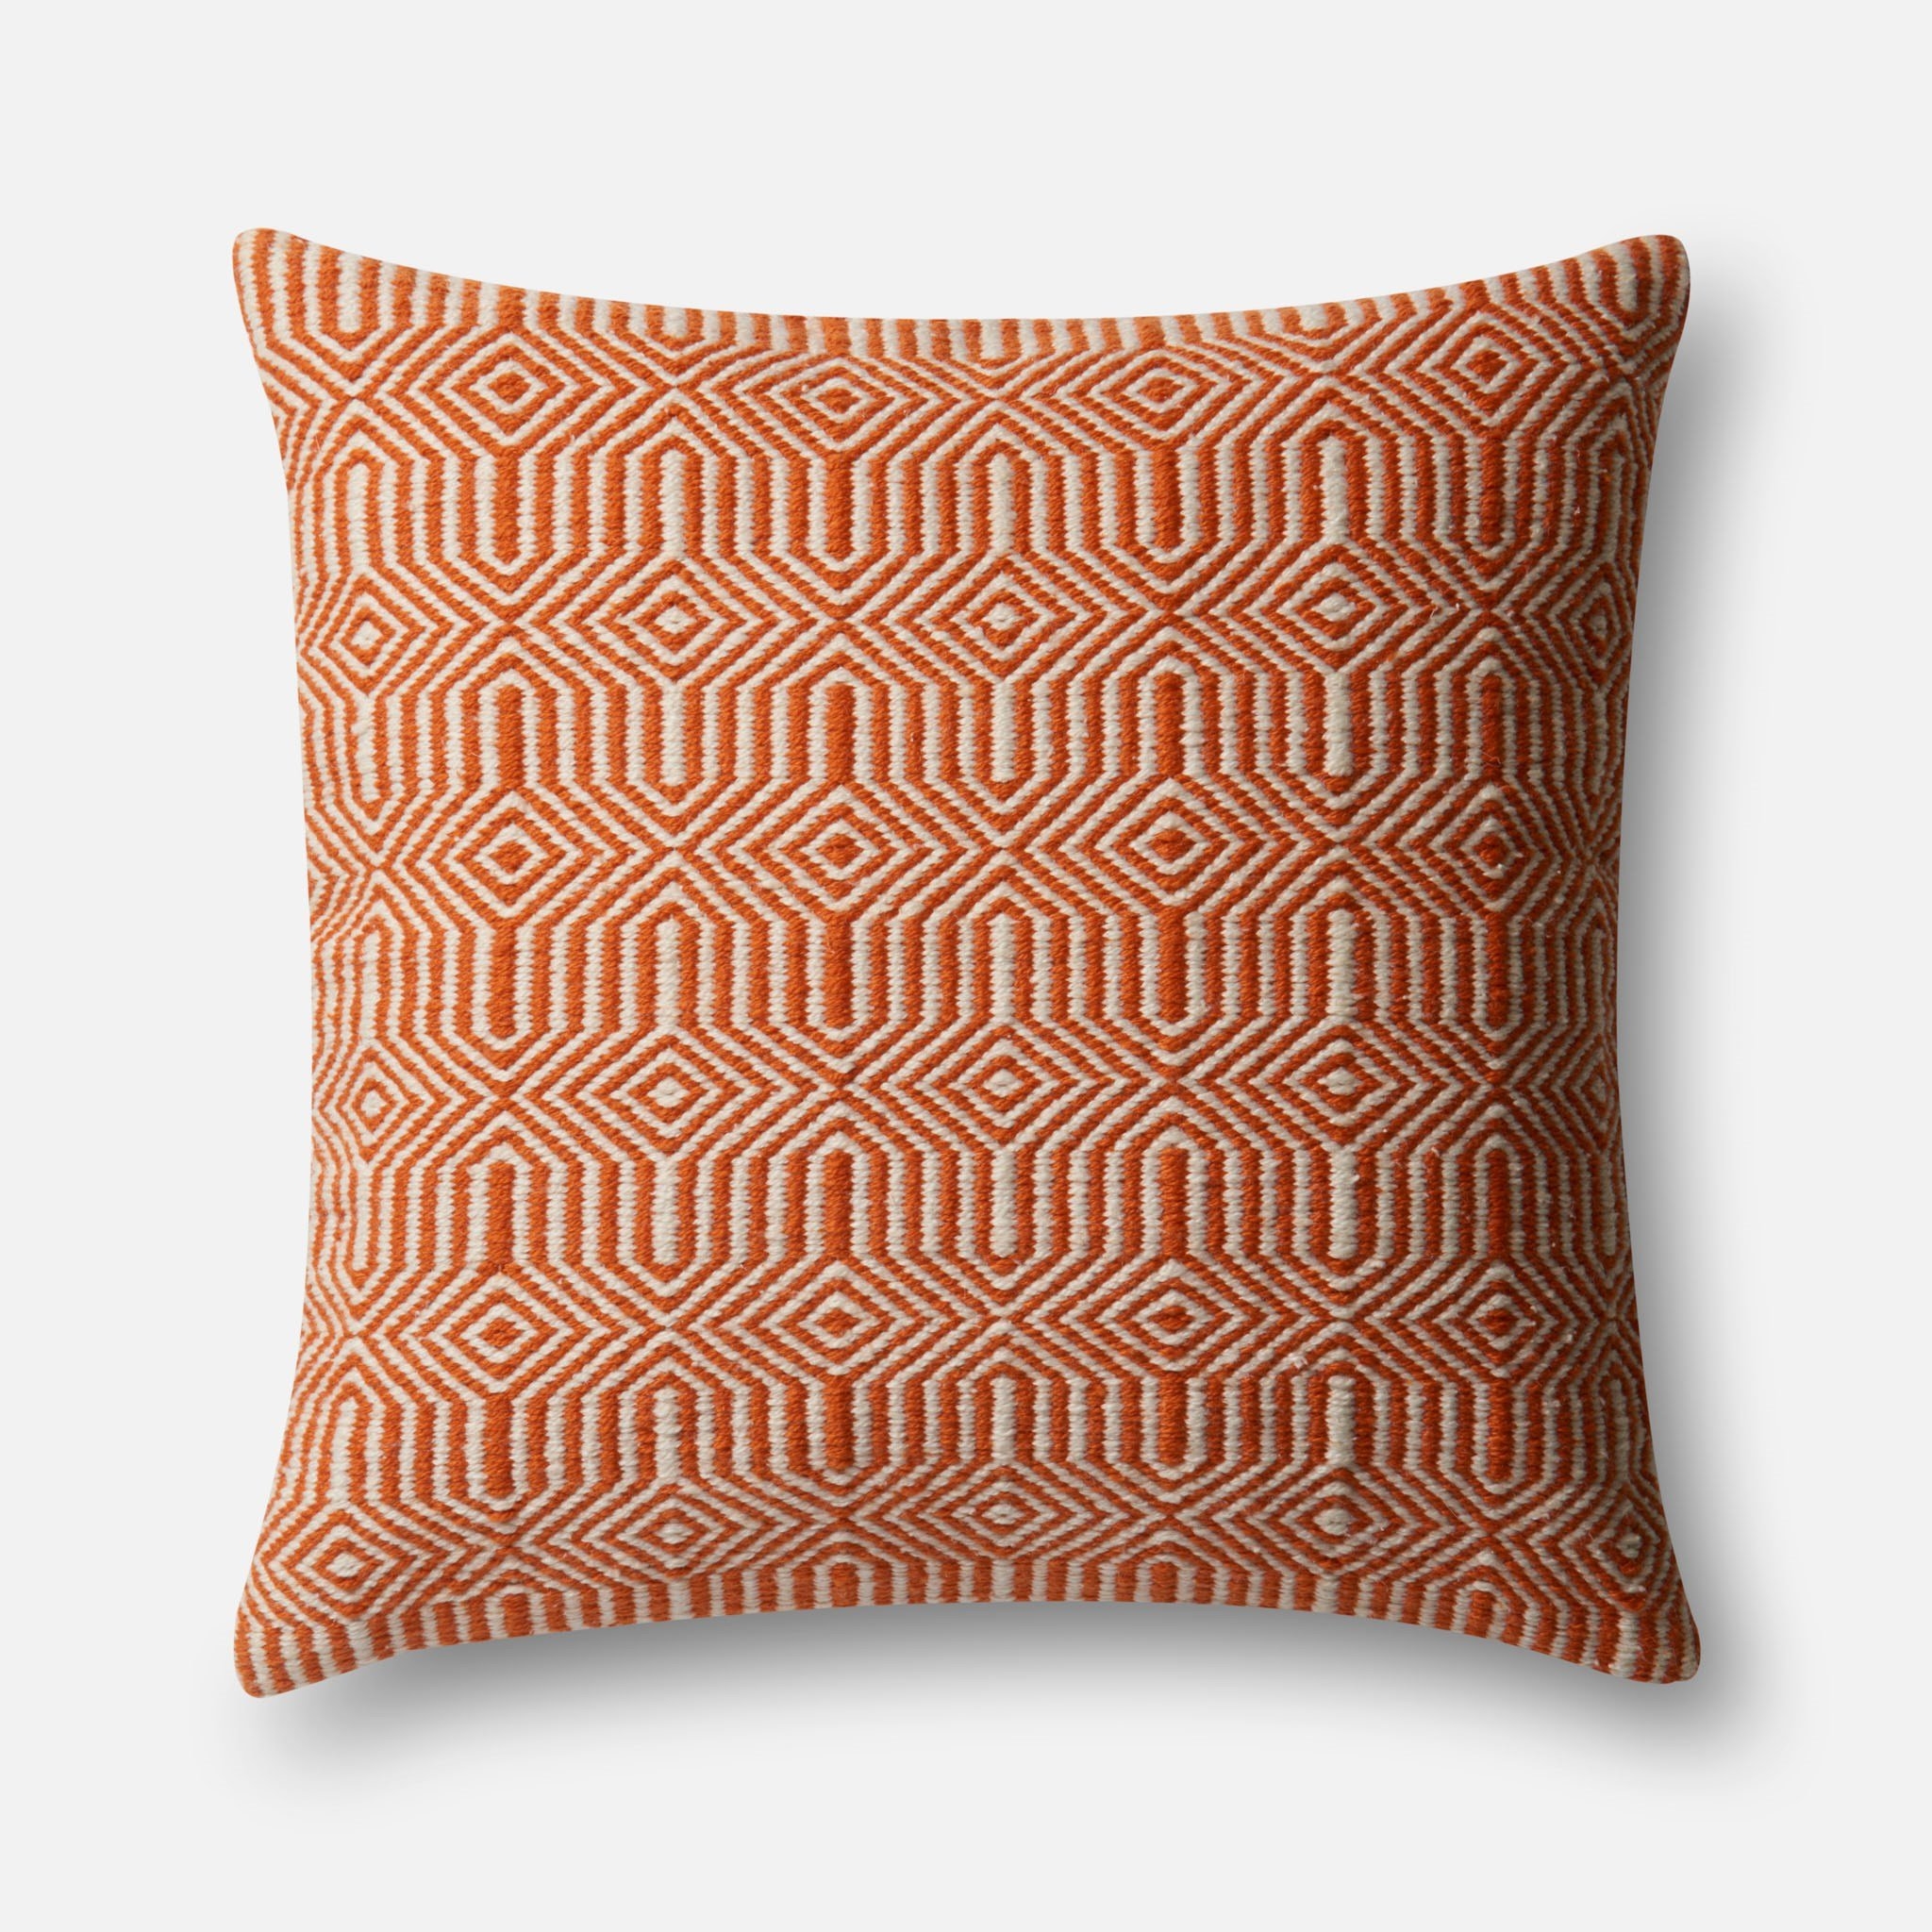 PILLOWS - ORANGE / IVORY - 22" X 22" Cover Only - Image 0